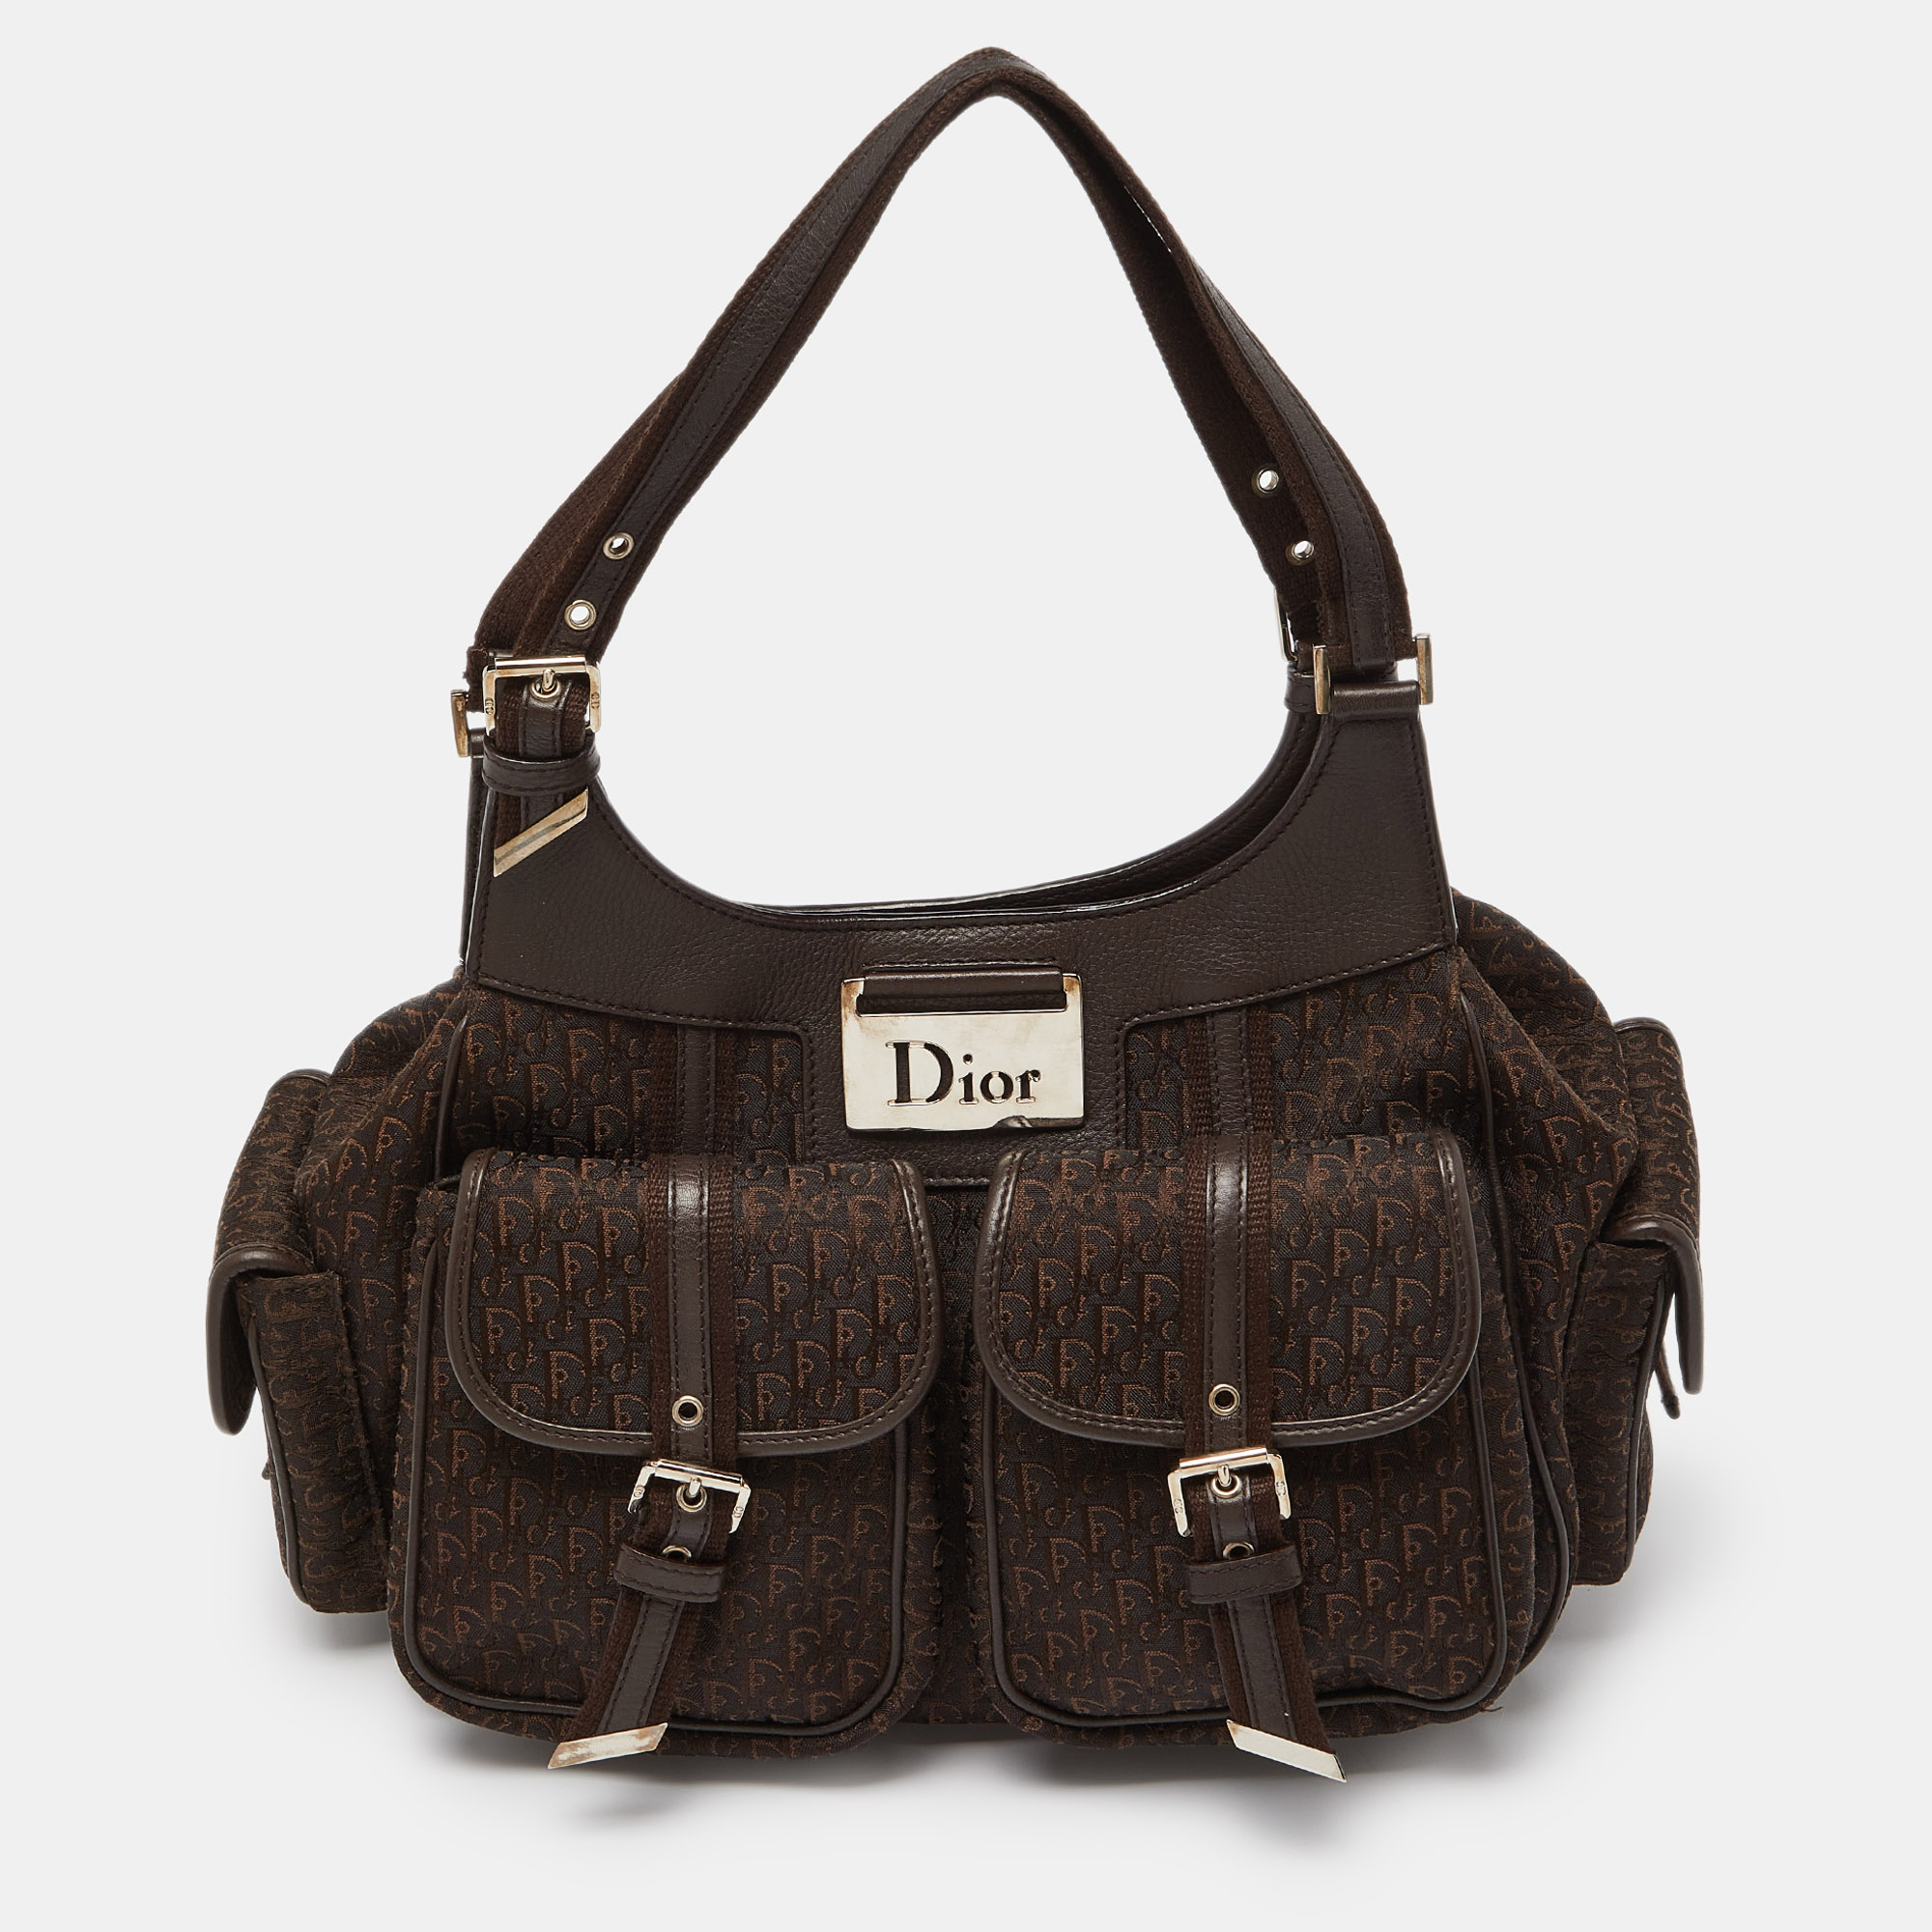 

Dior Brown Diorissimo Canvas and Leather Multi Pocket Shoulder Bag